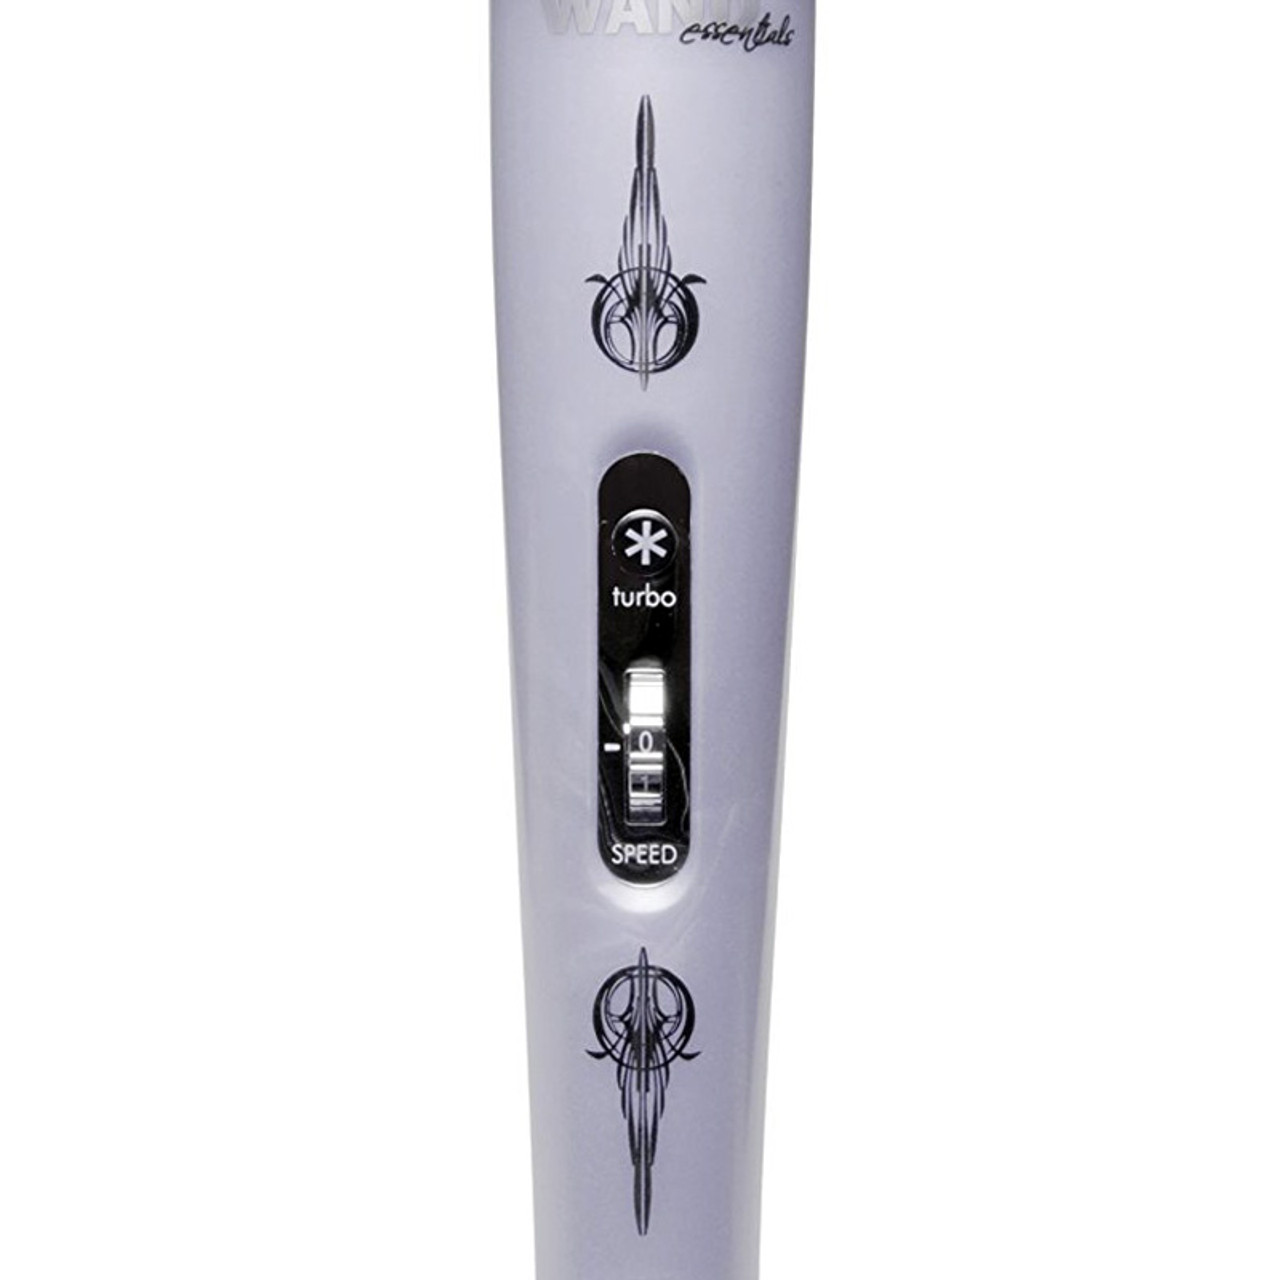 Wand Essentials 8 Speed 8 Function Wand Body Vibrating Massager